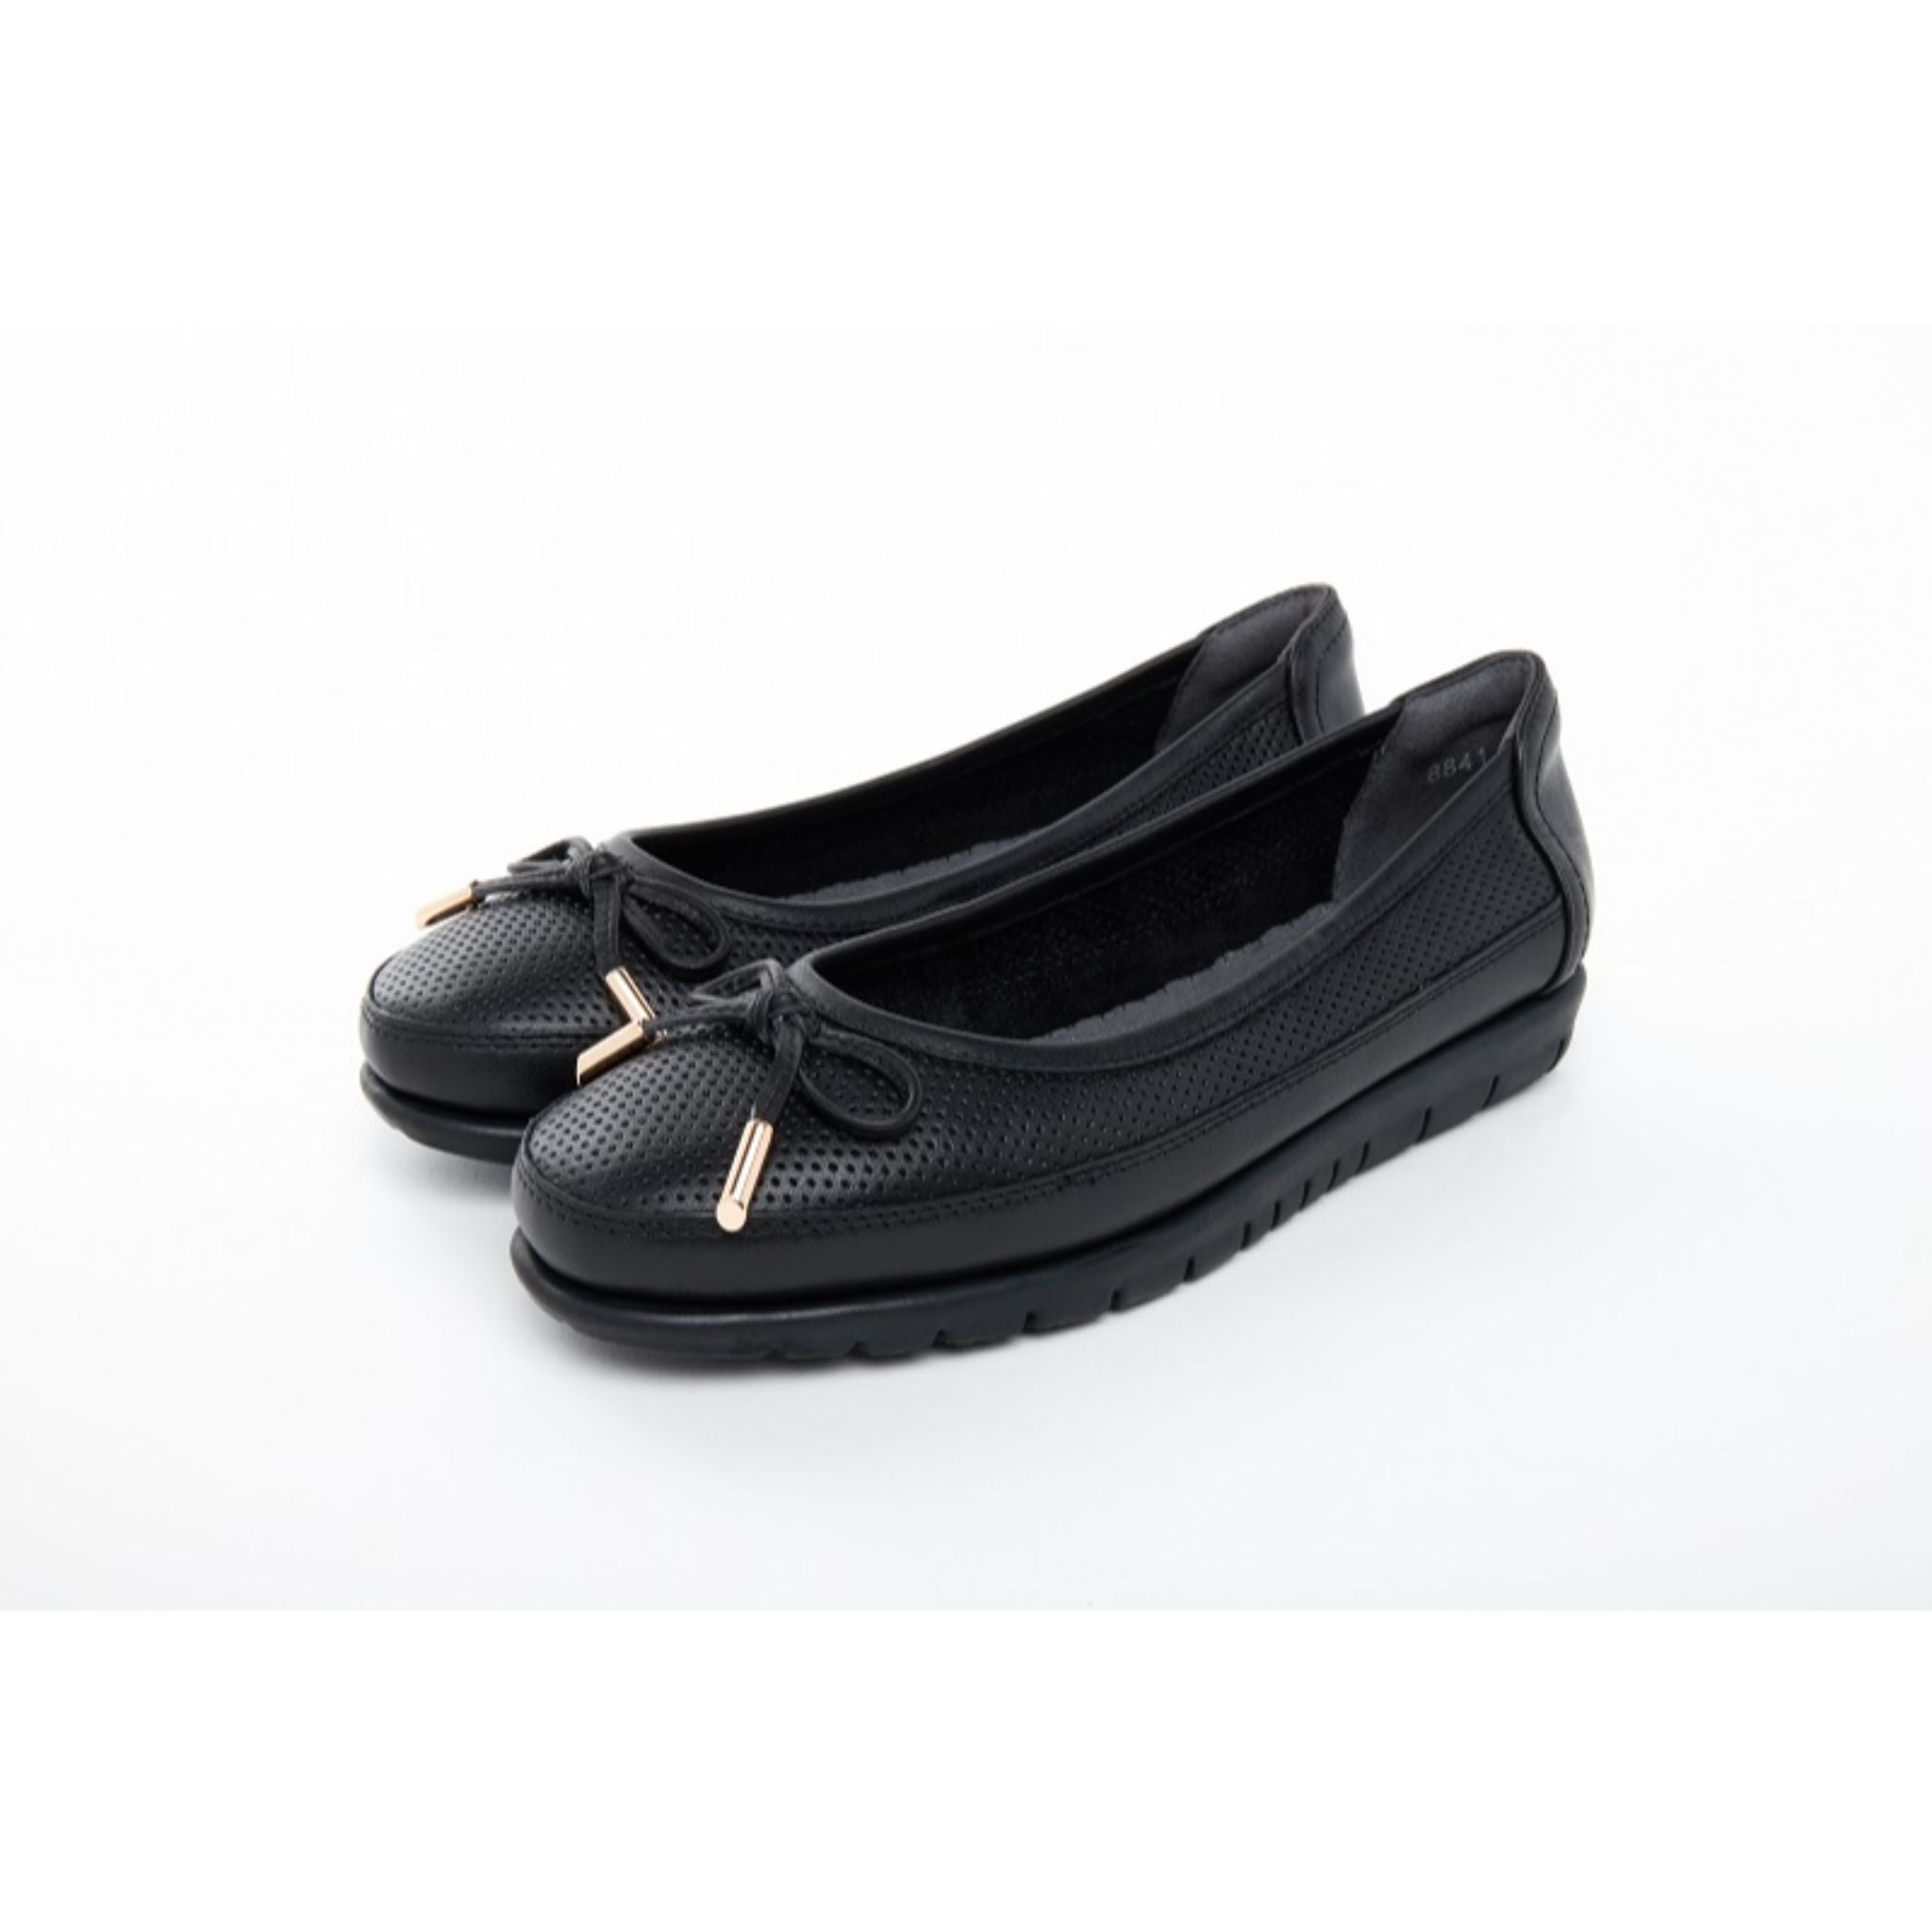 Barani Leather Pumps Ballet Flats With Fixed Bow 8841-141 Black